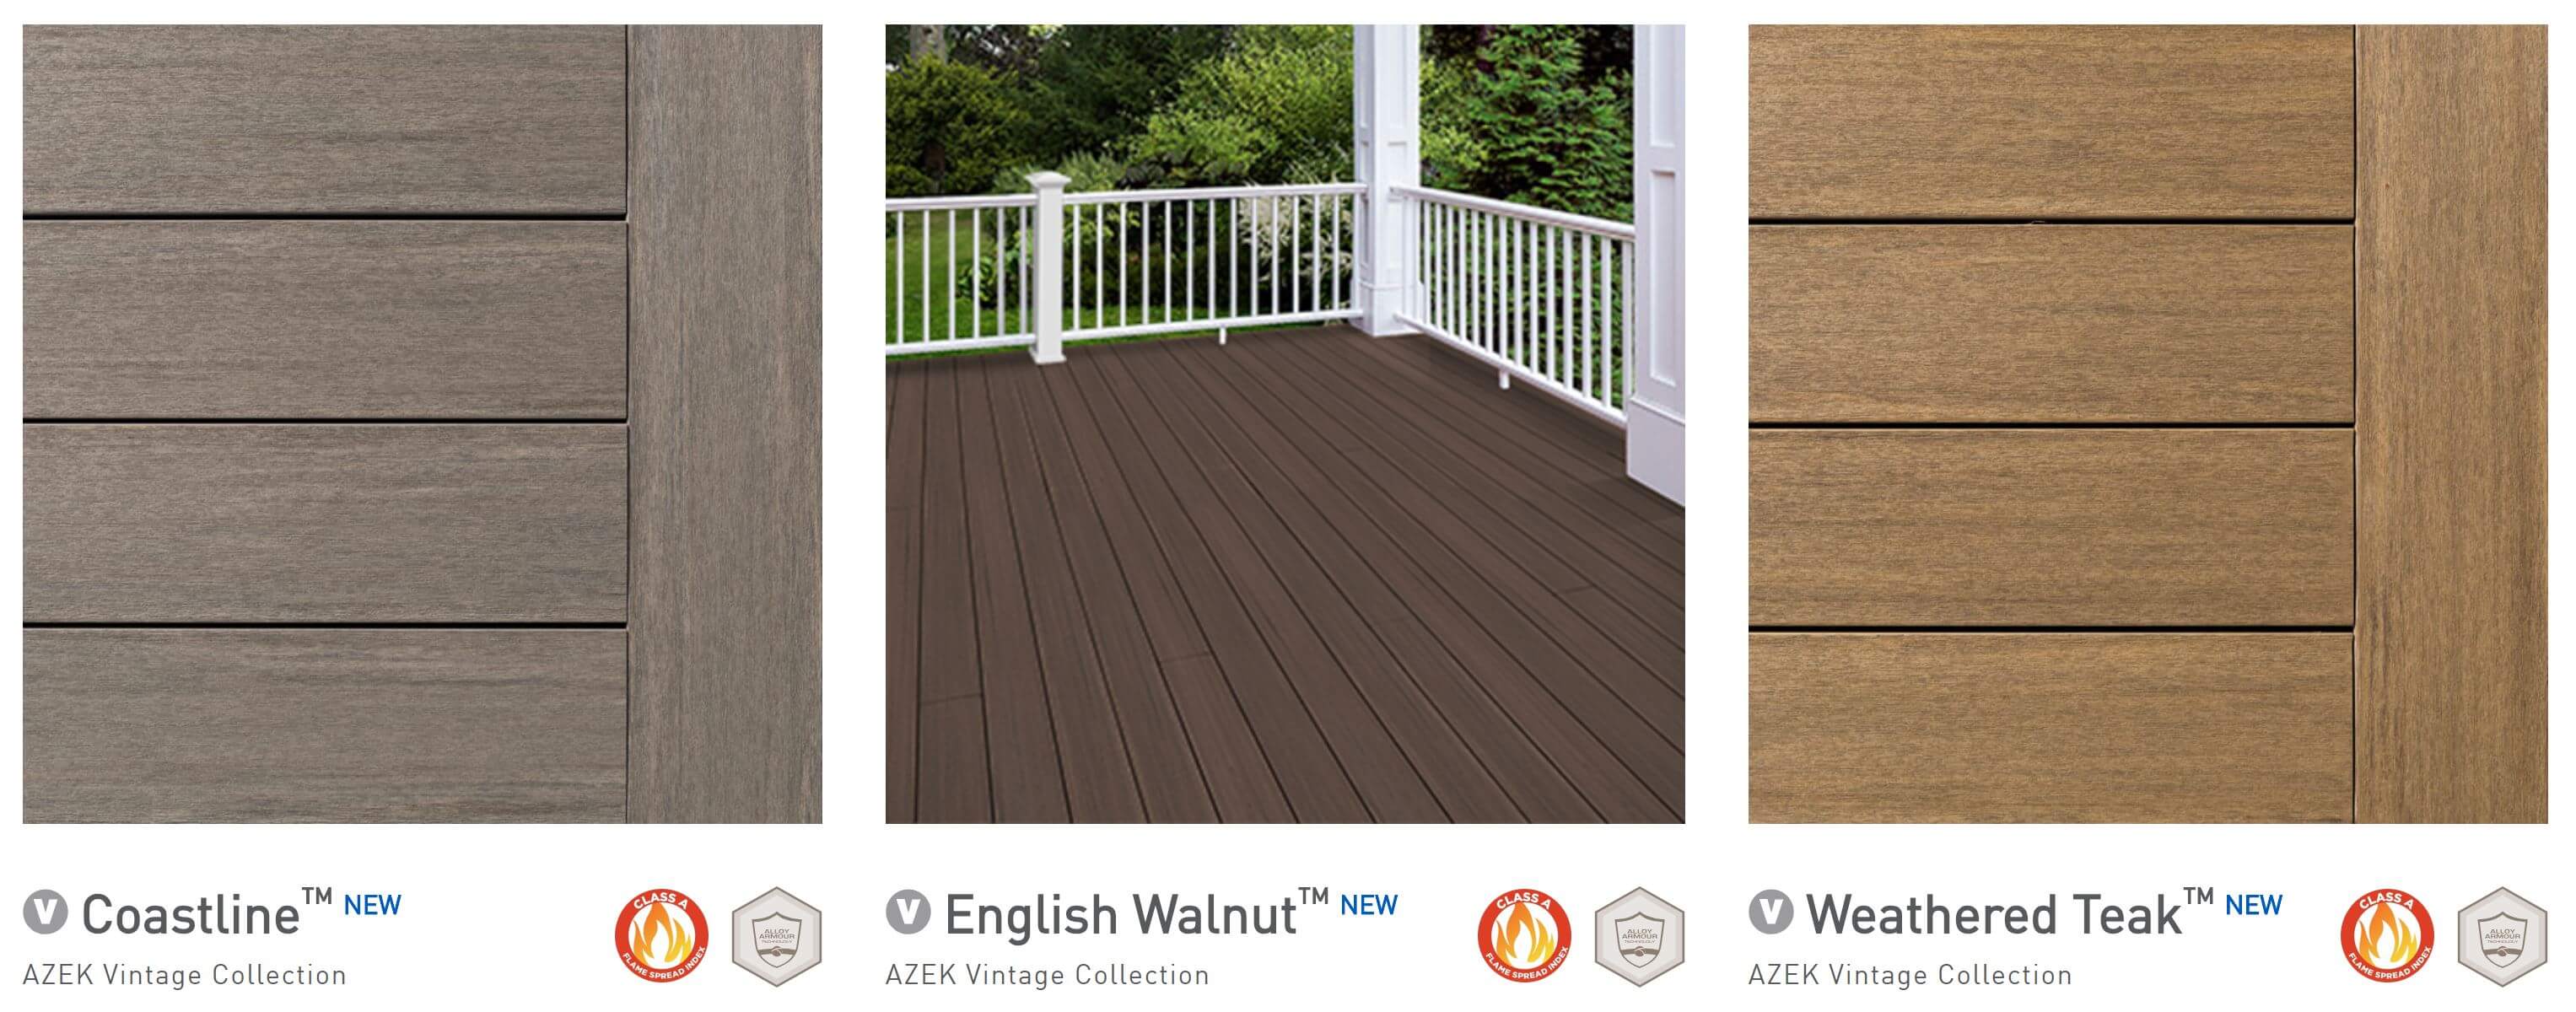 Deck design and color